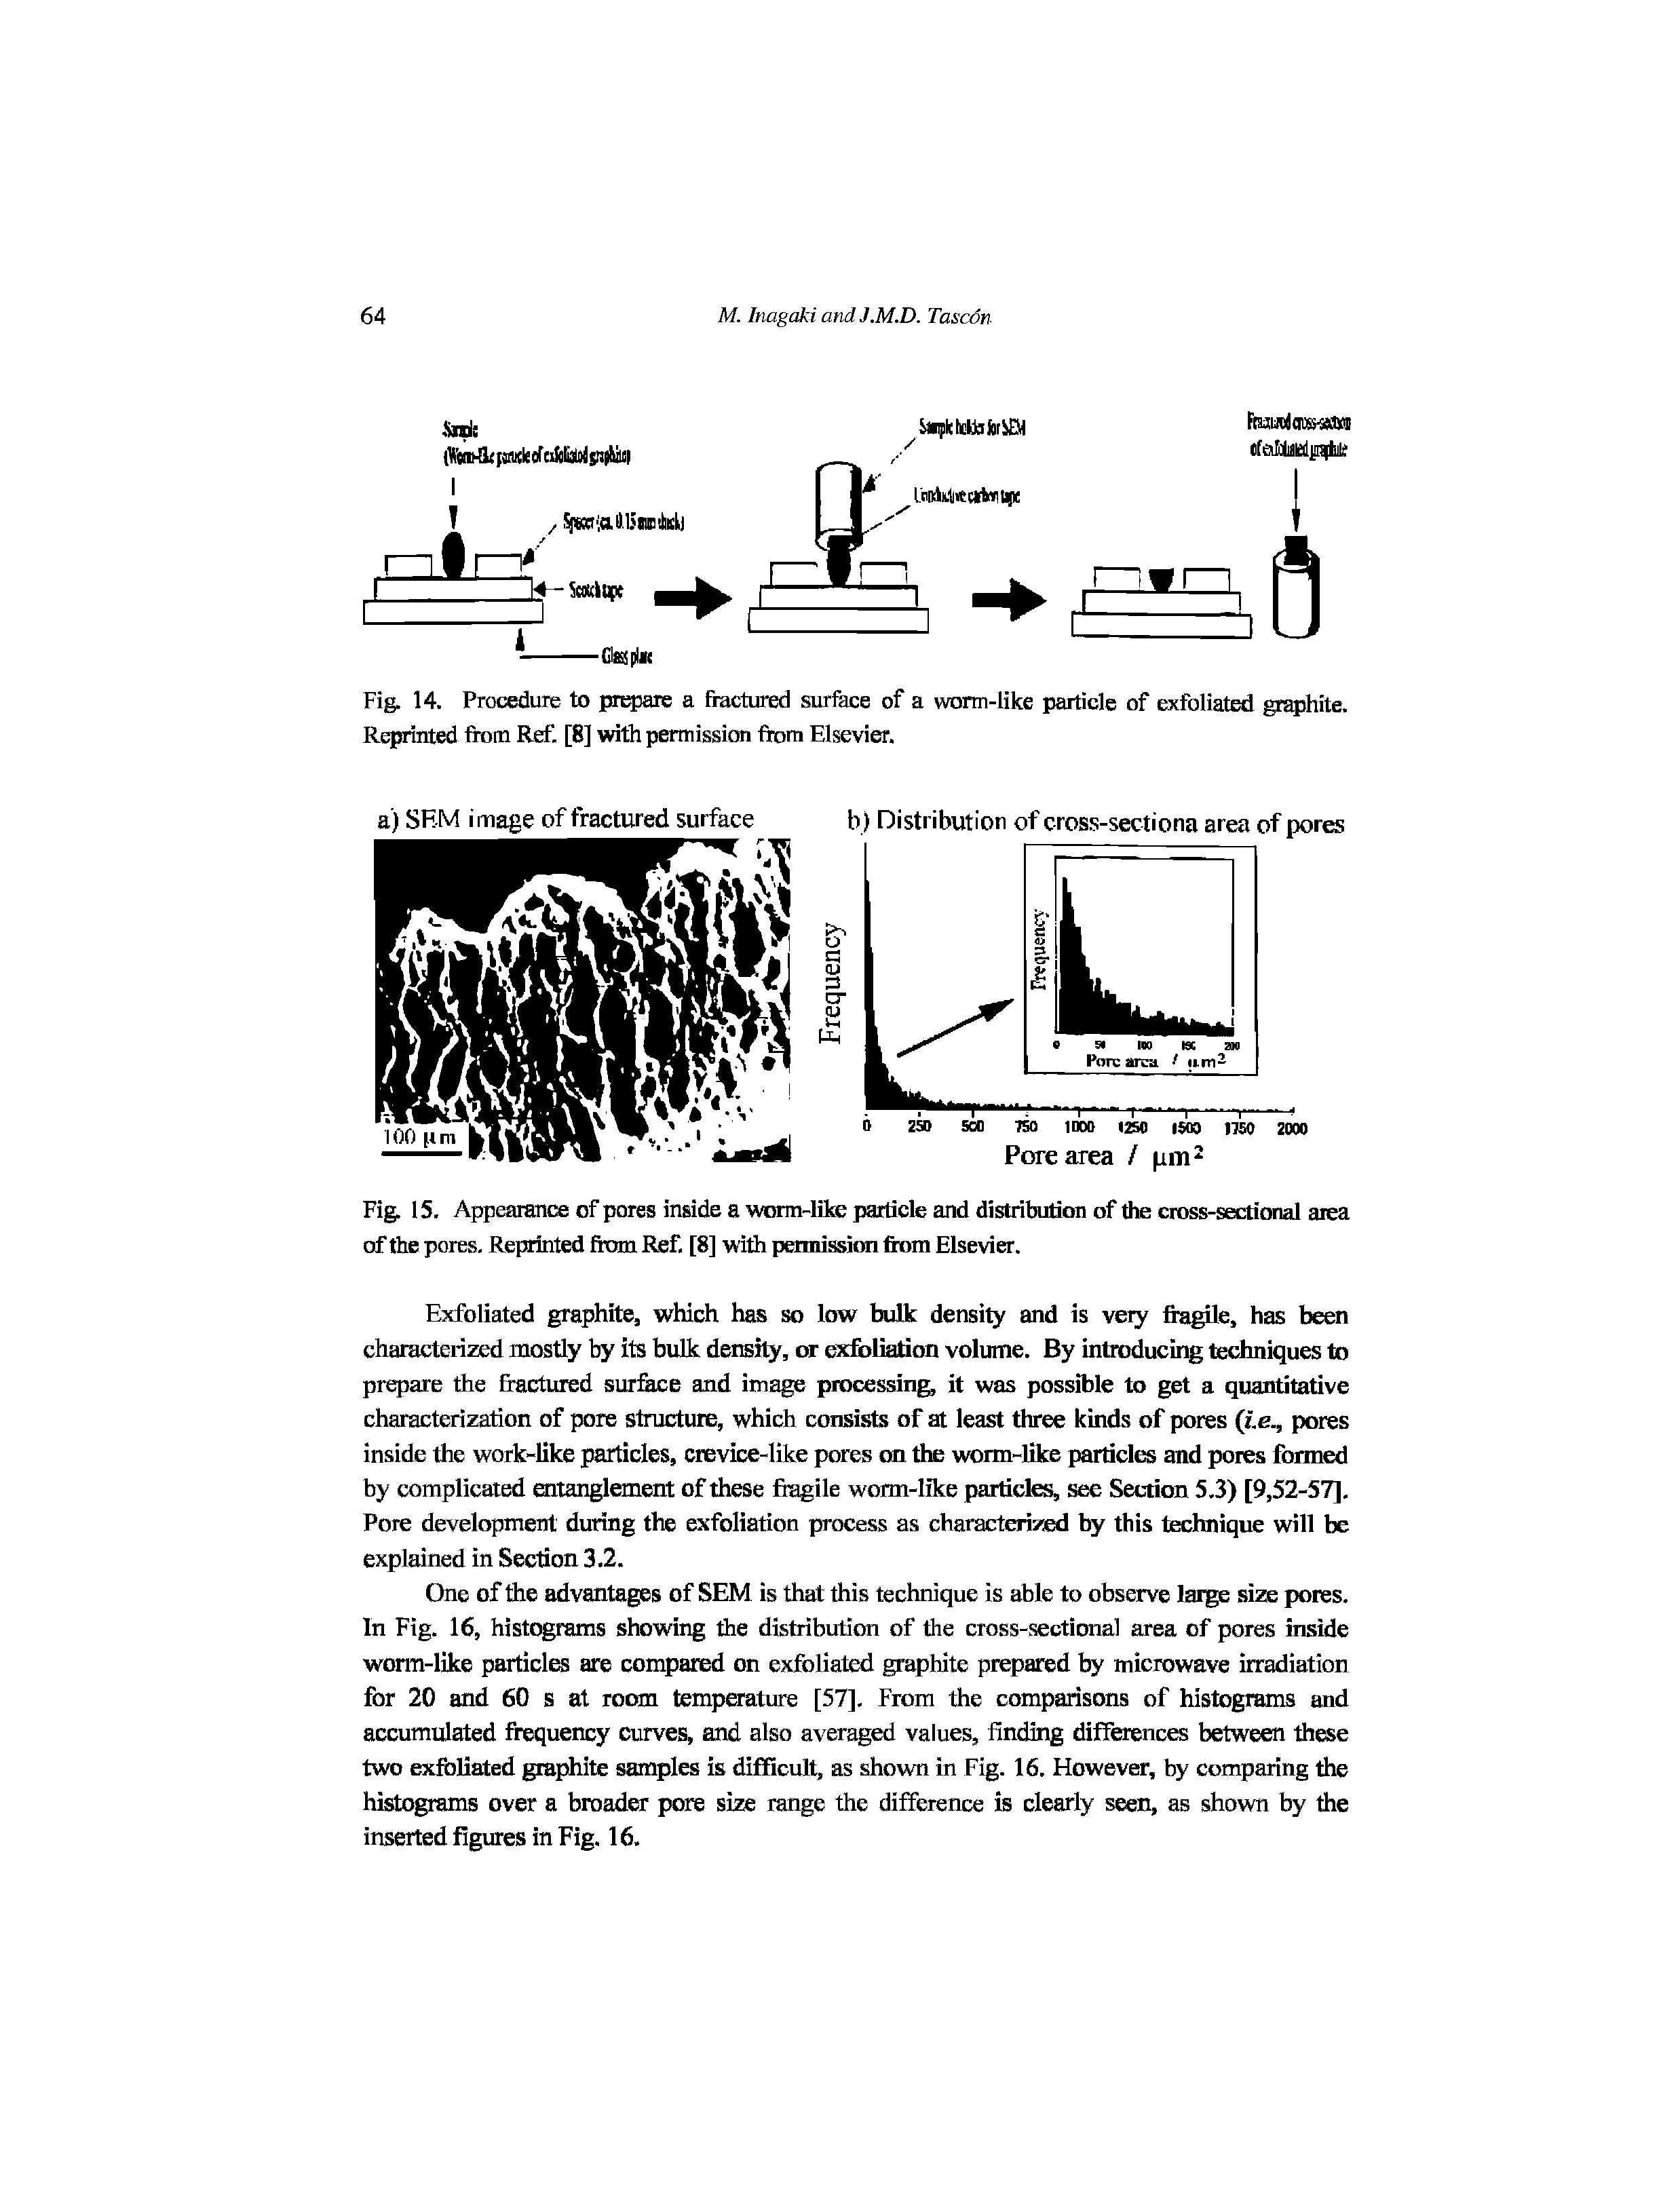 Fig. 14. Procedure to prepare a fiactured surface of a worm-like particle of exfoliated graphite. Reprinted from Ref. [8] with permission from Elsevier.